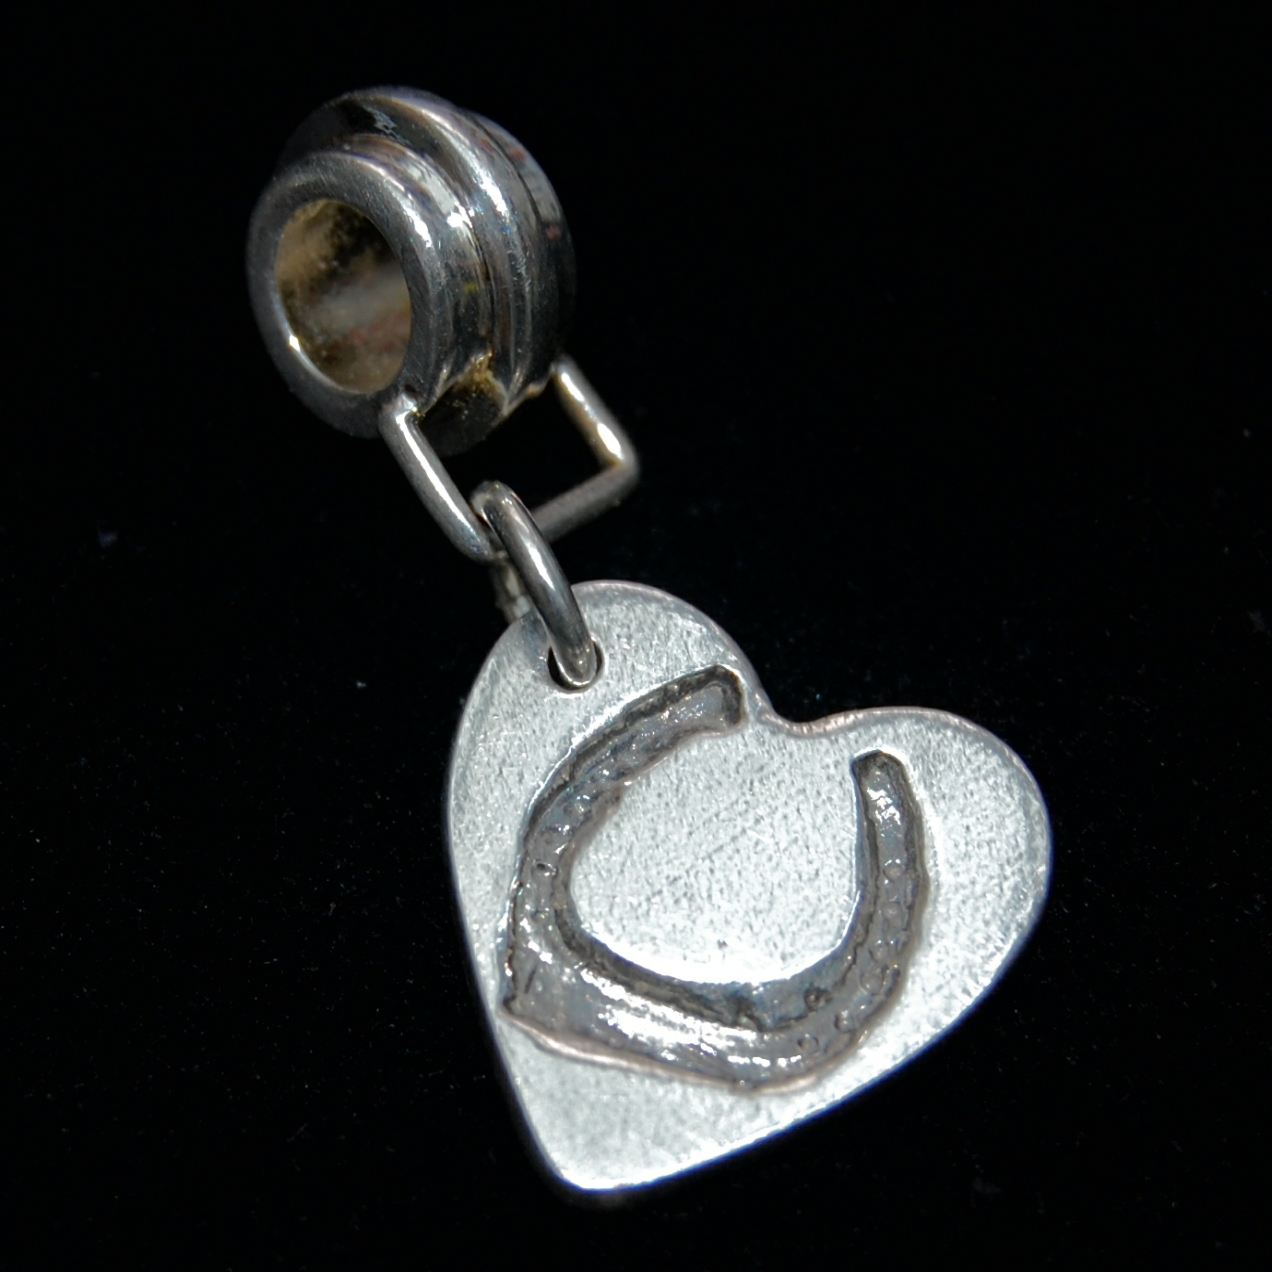 Small silver heart charm with your horse's shoe imprint. Presented on a charm carrier ready to add to your bracelet.